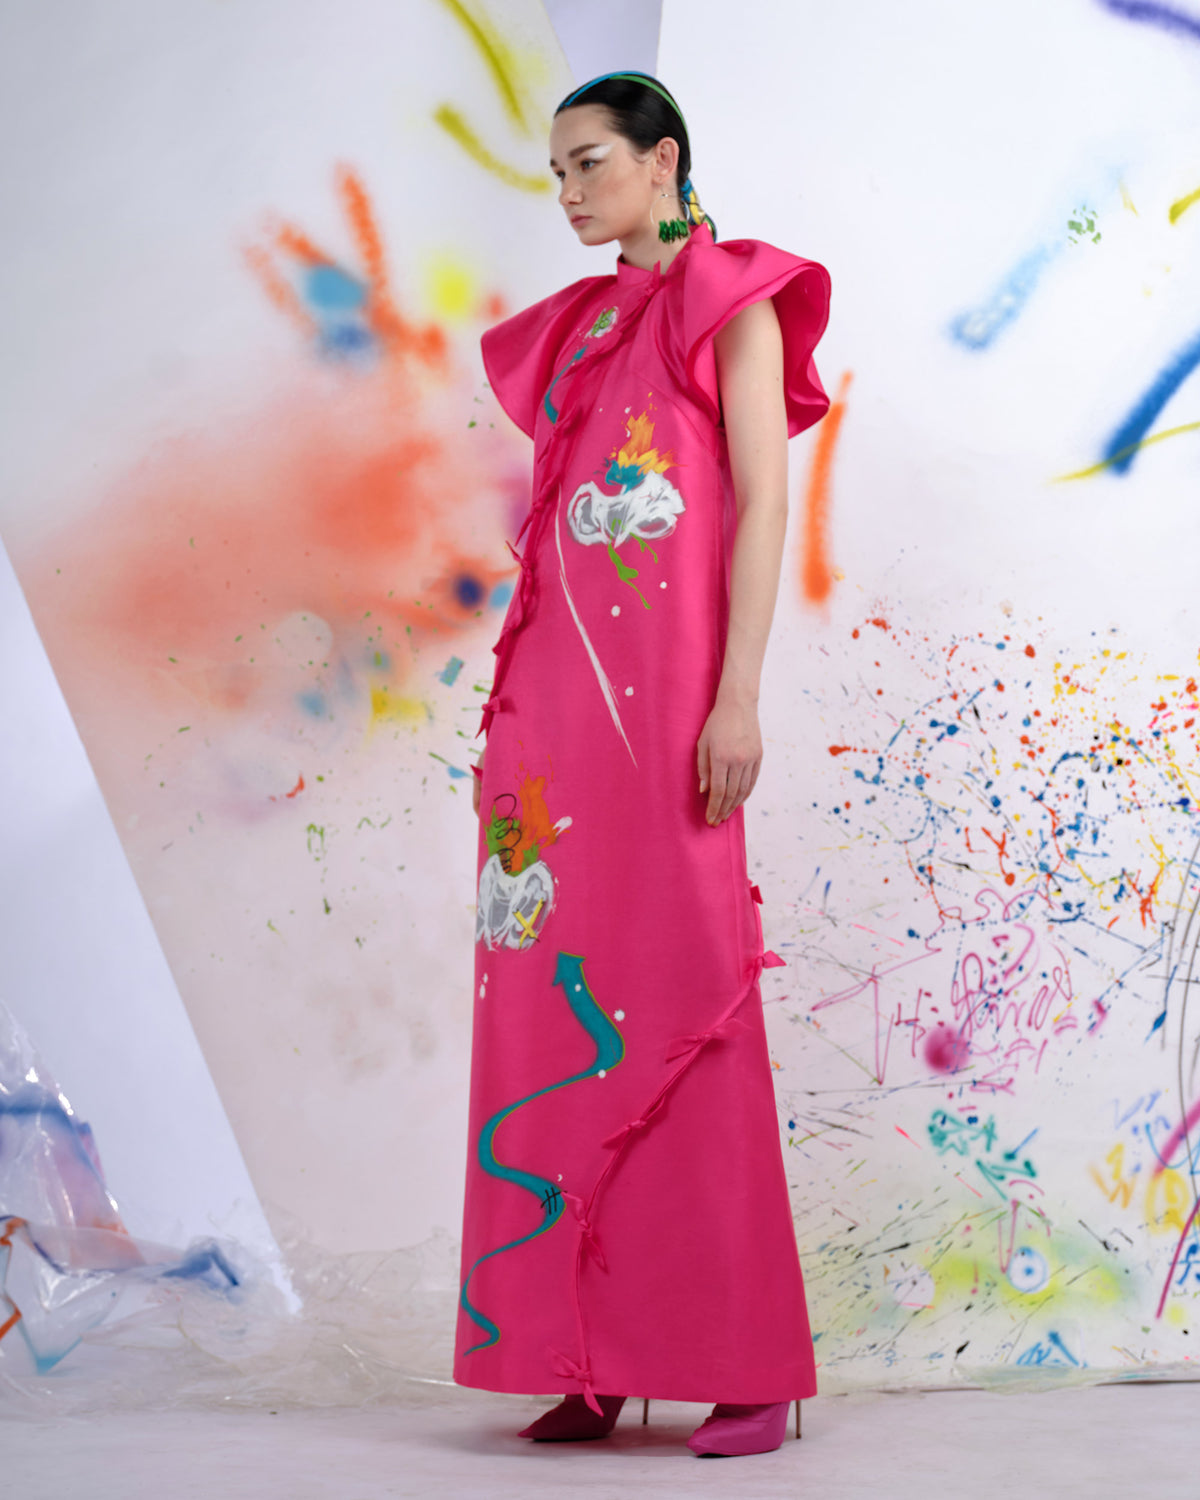 Dragon Curving - Hot Pink Gown Dress